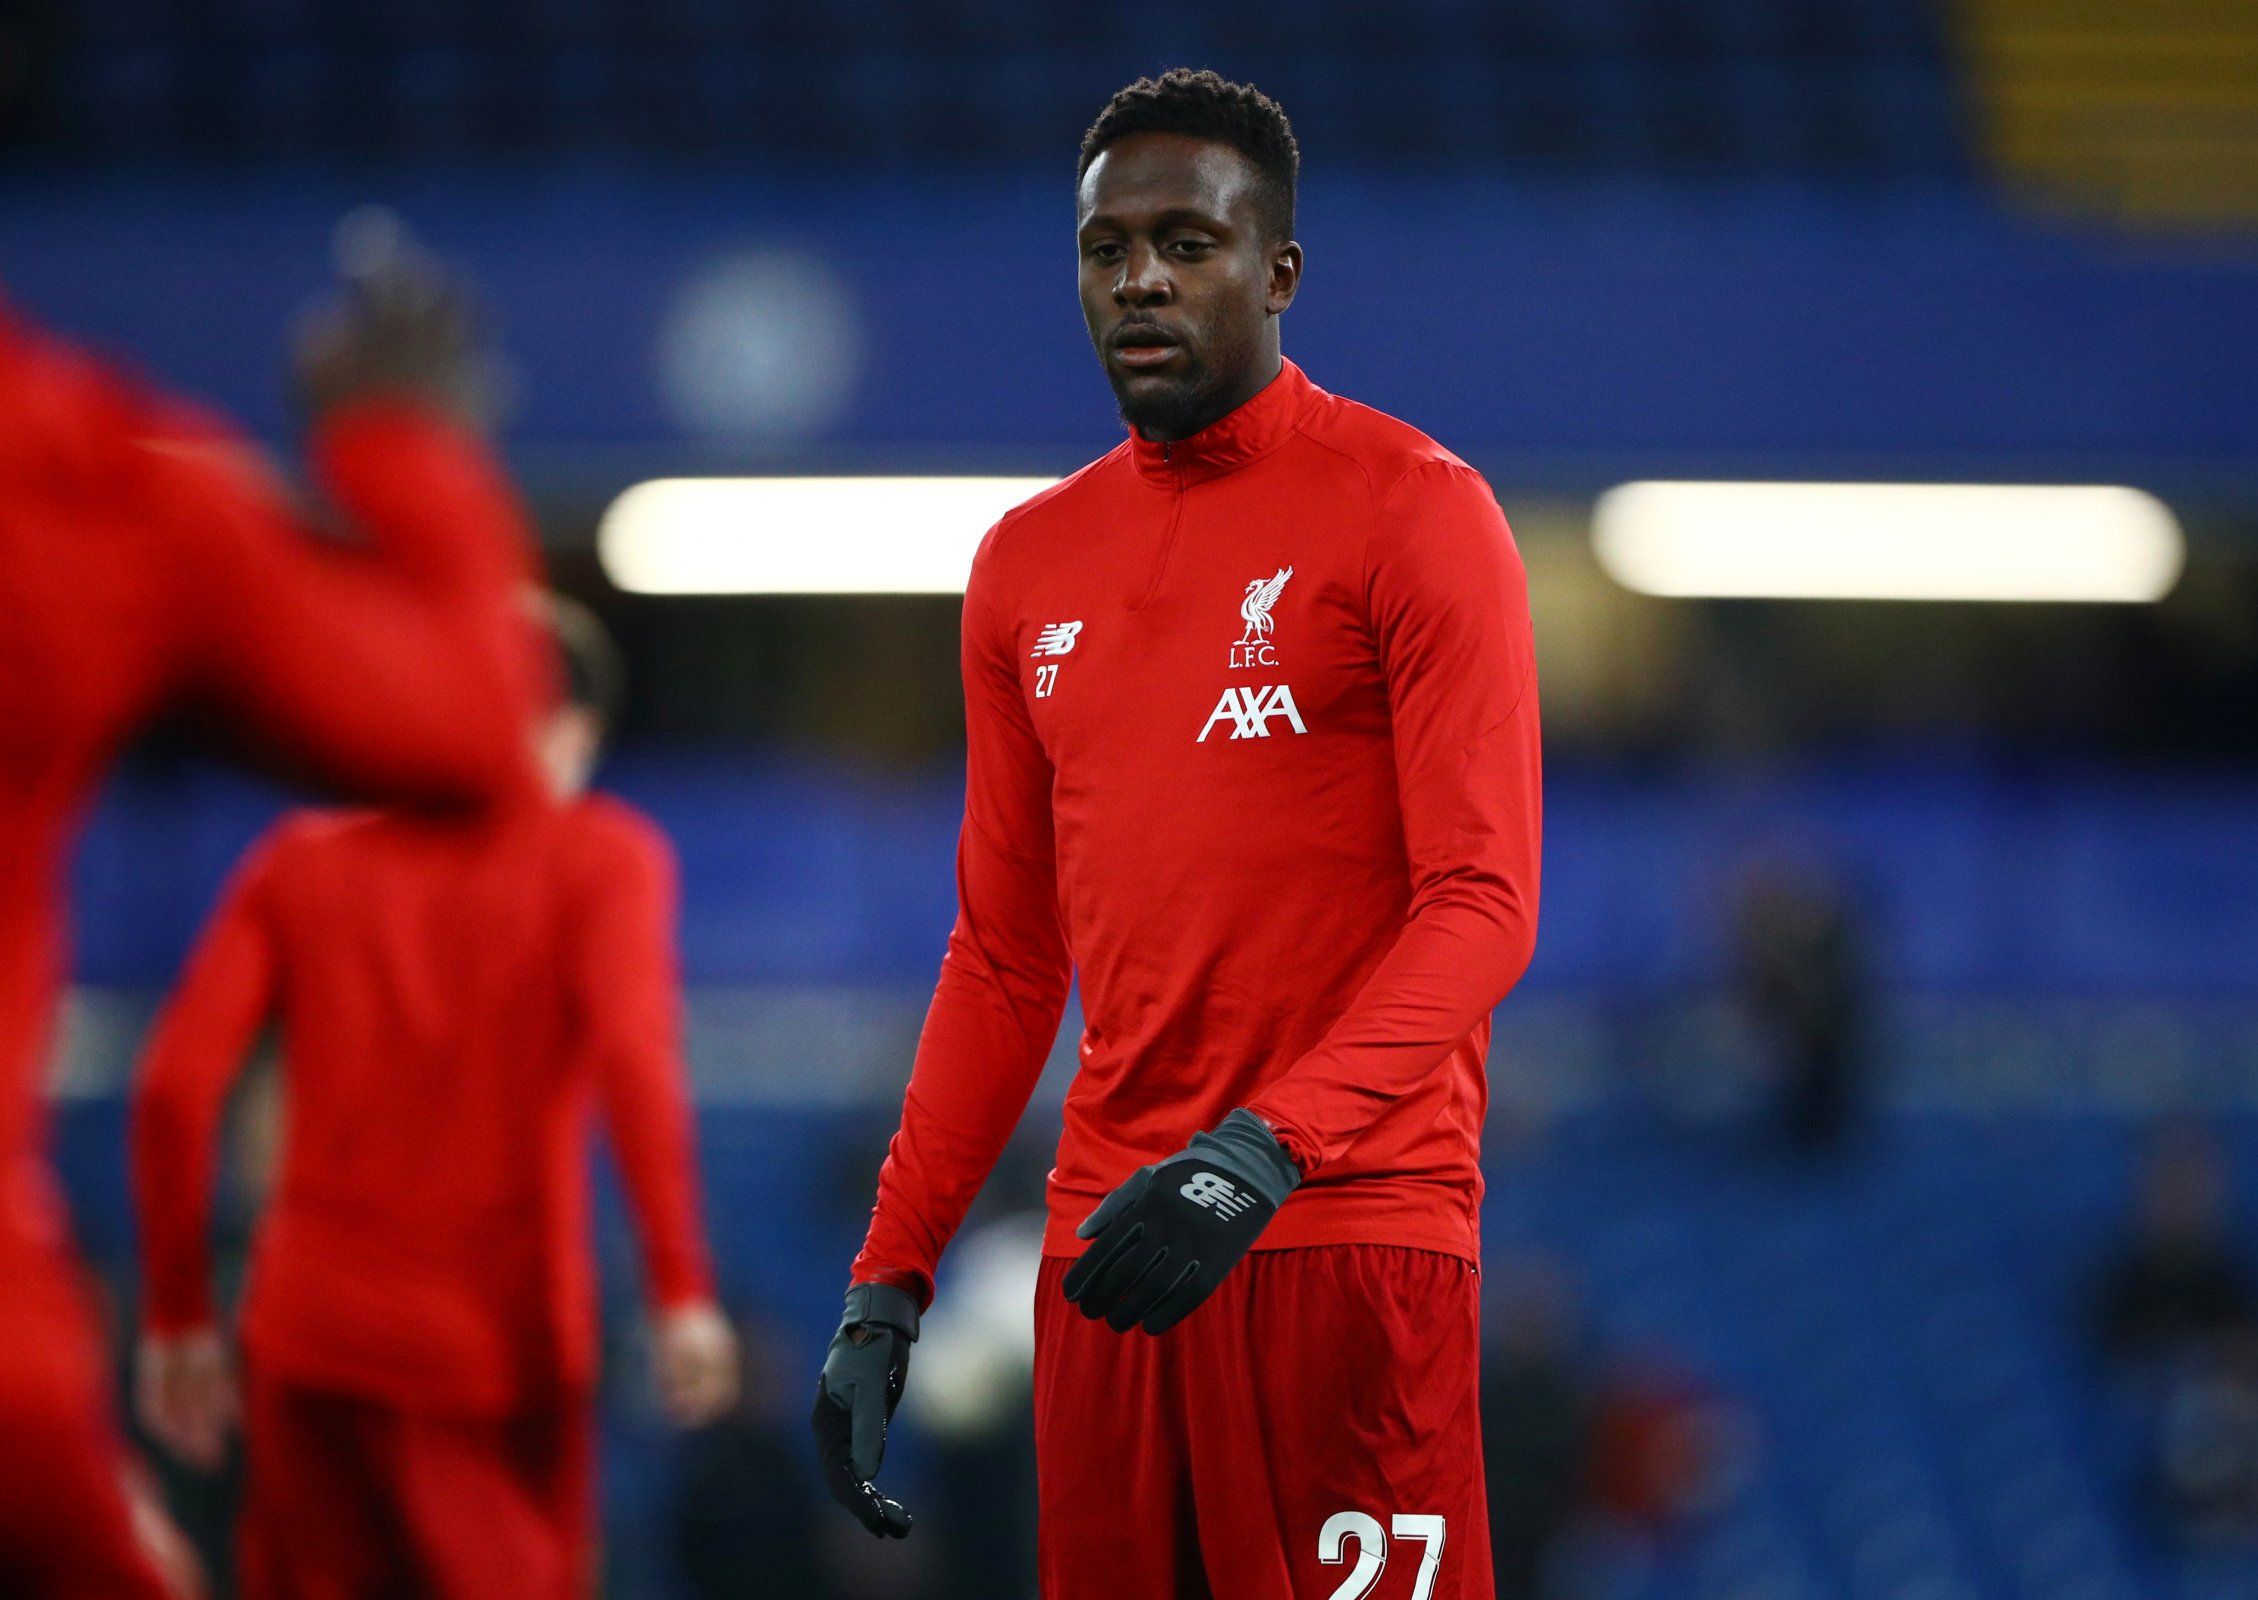 liverpool striker divock origi in warm up before kickoff against chelsea fa cup